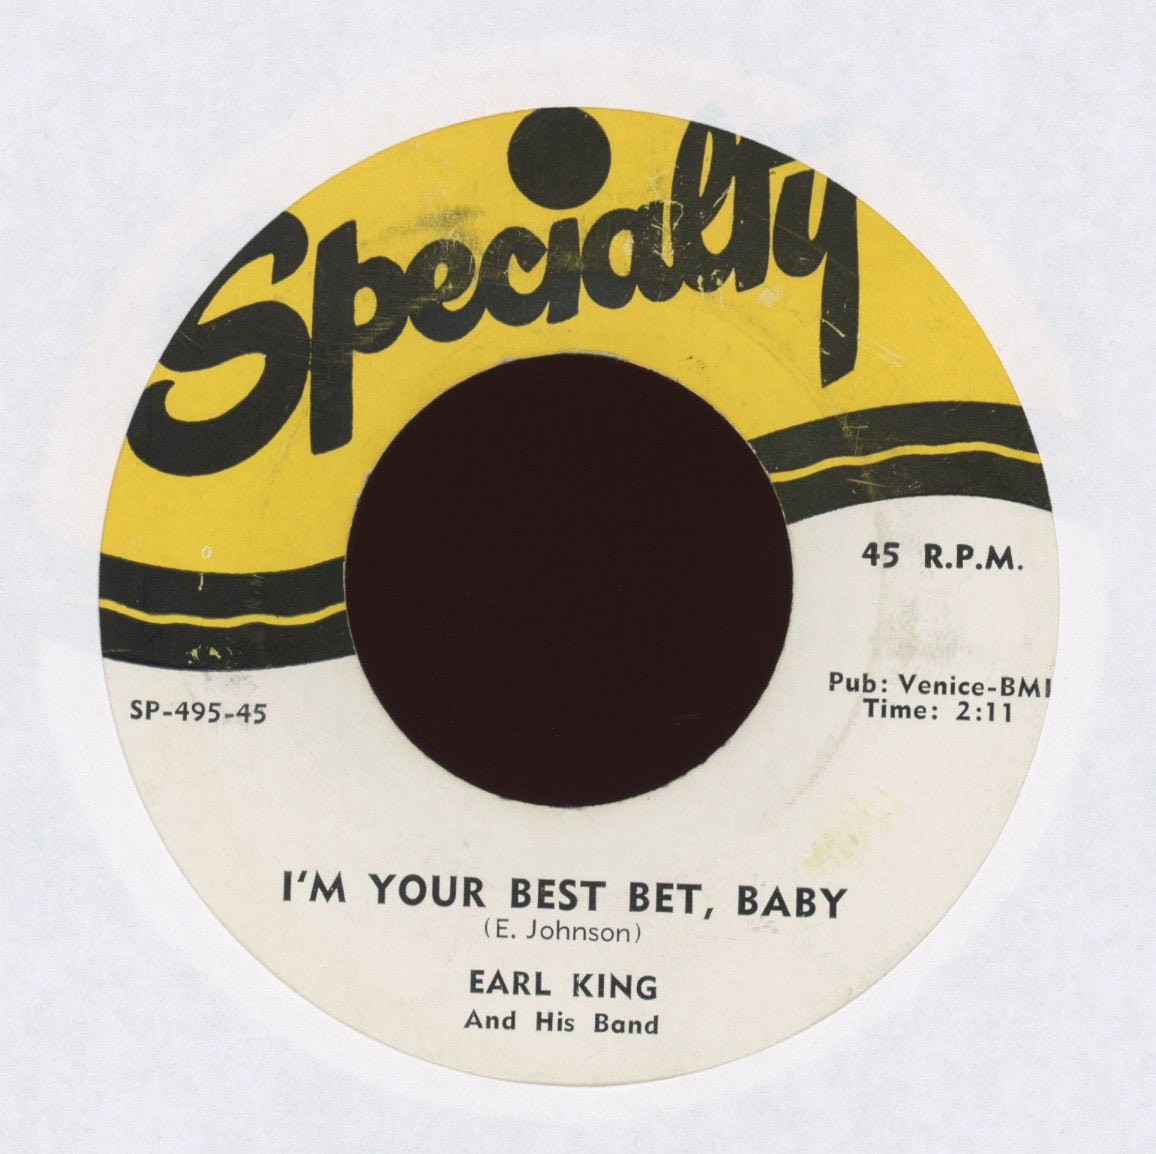 Earl King And His Band - I'm Your Best Bet, Baby on Specialty